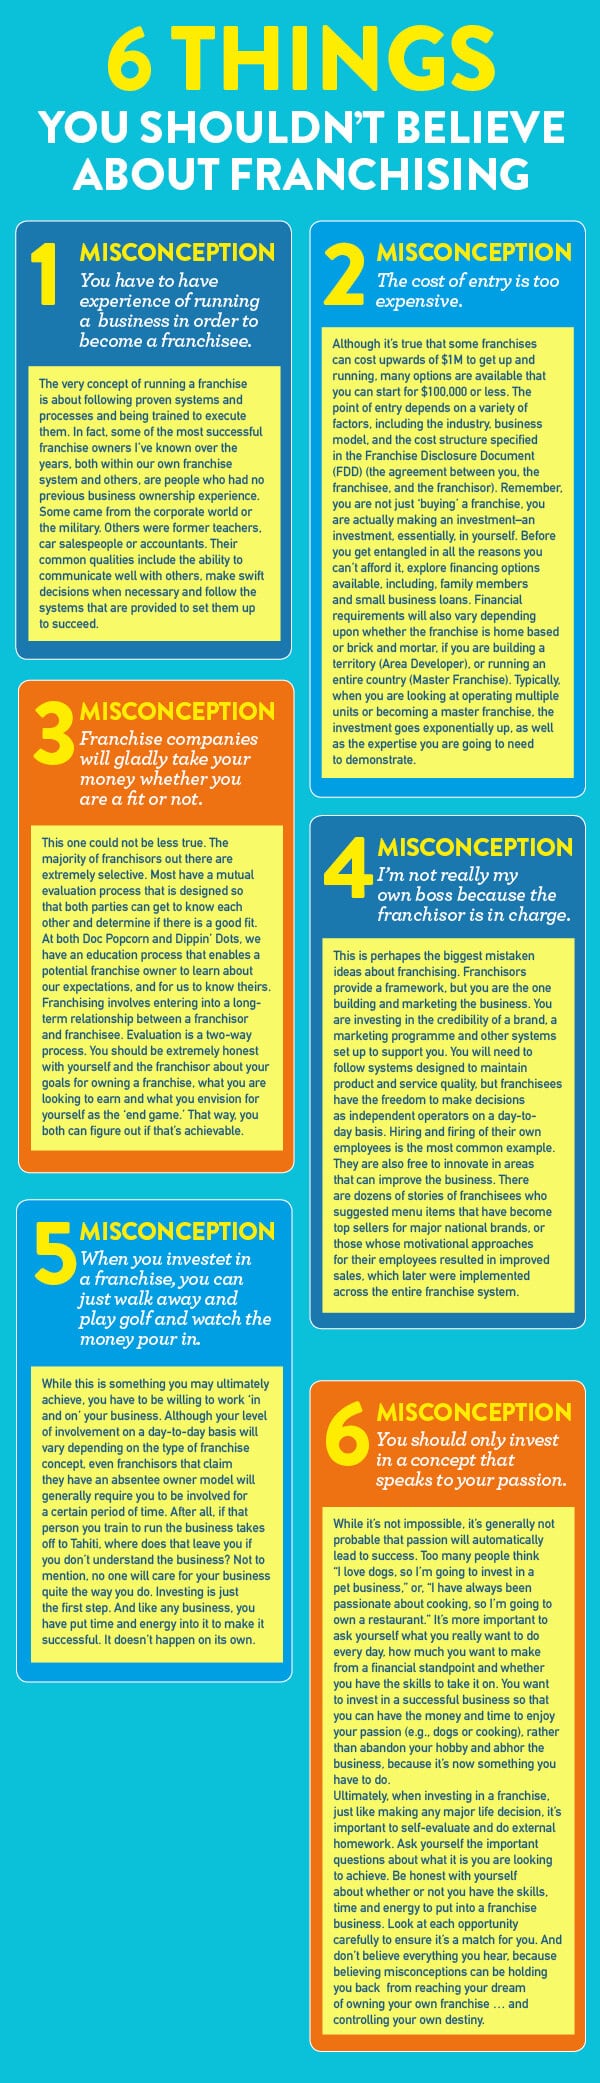 6 misconceptions about franchising